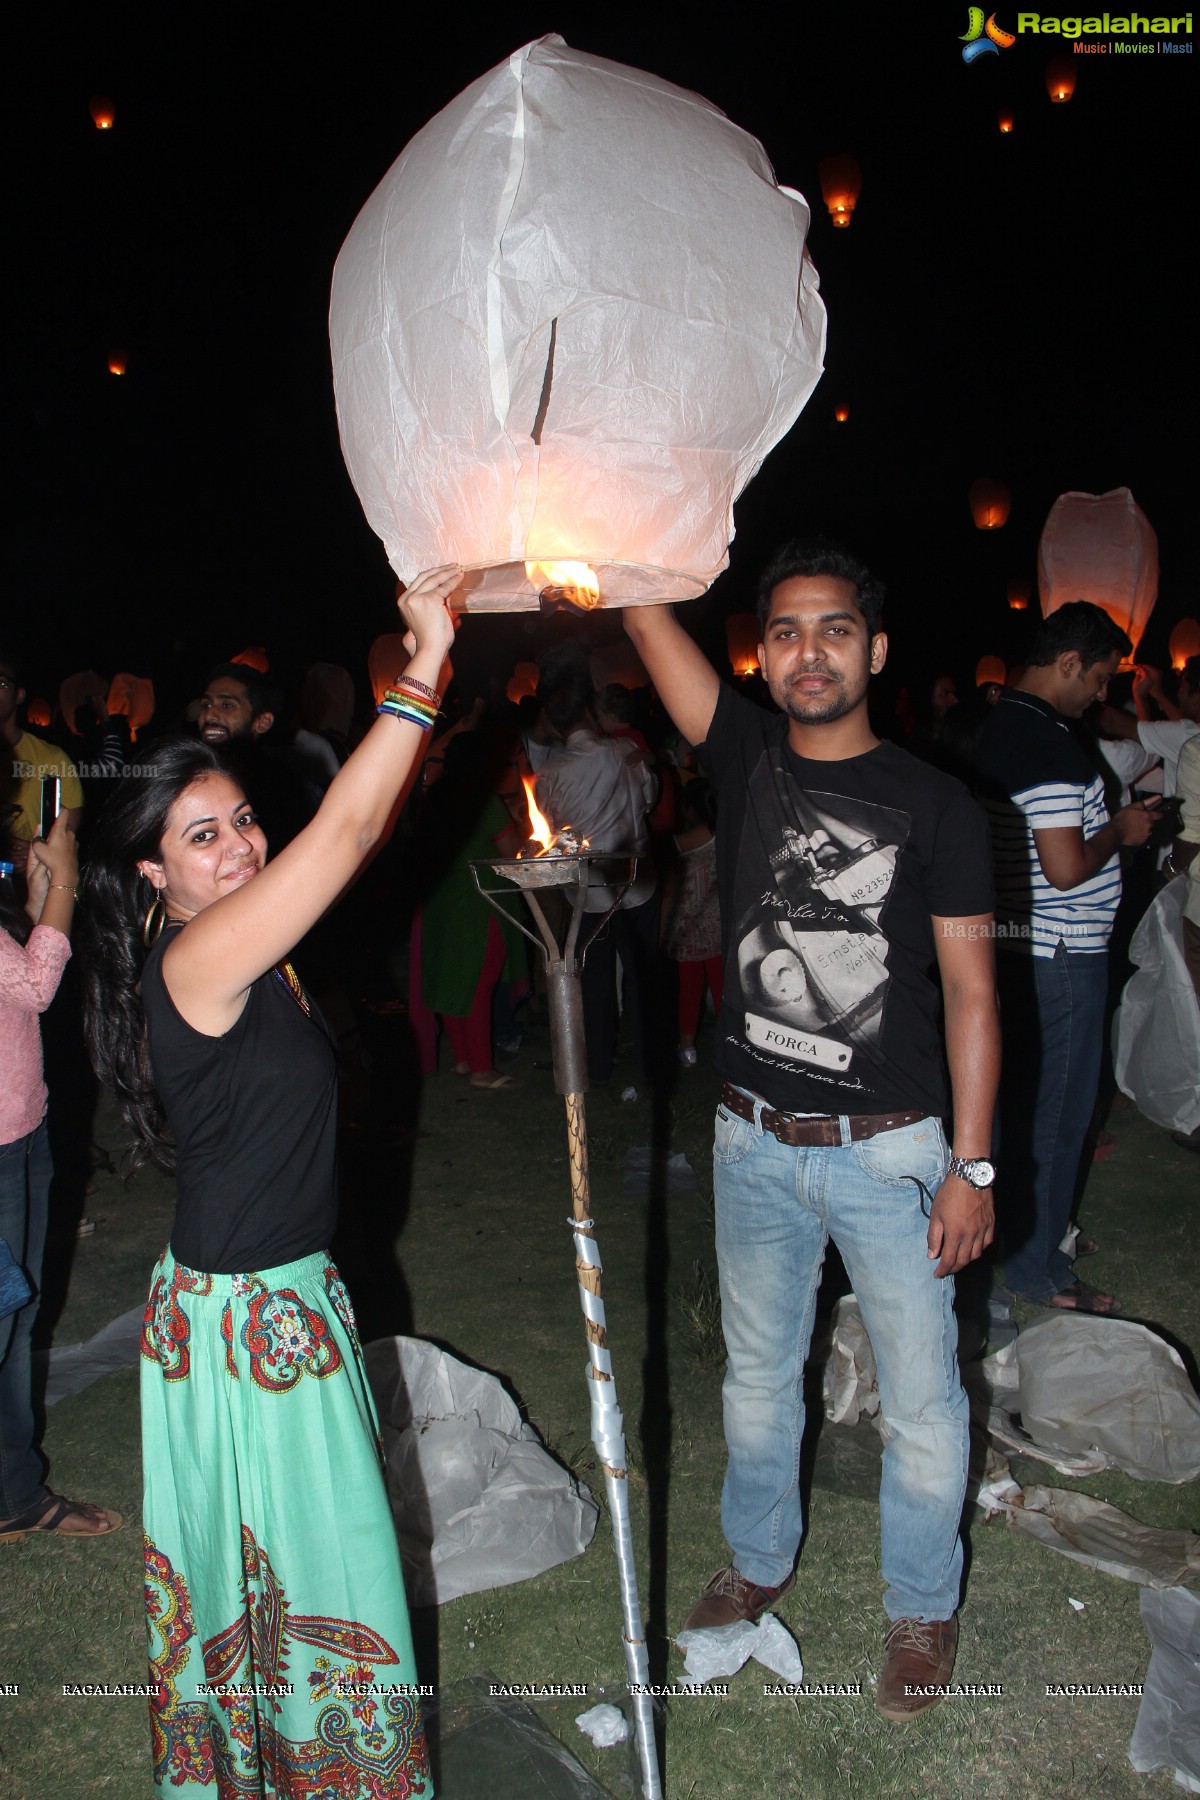 Grand Finale Day of 'Rise Up 2015' - India's Biggest Sky Lantern Festival